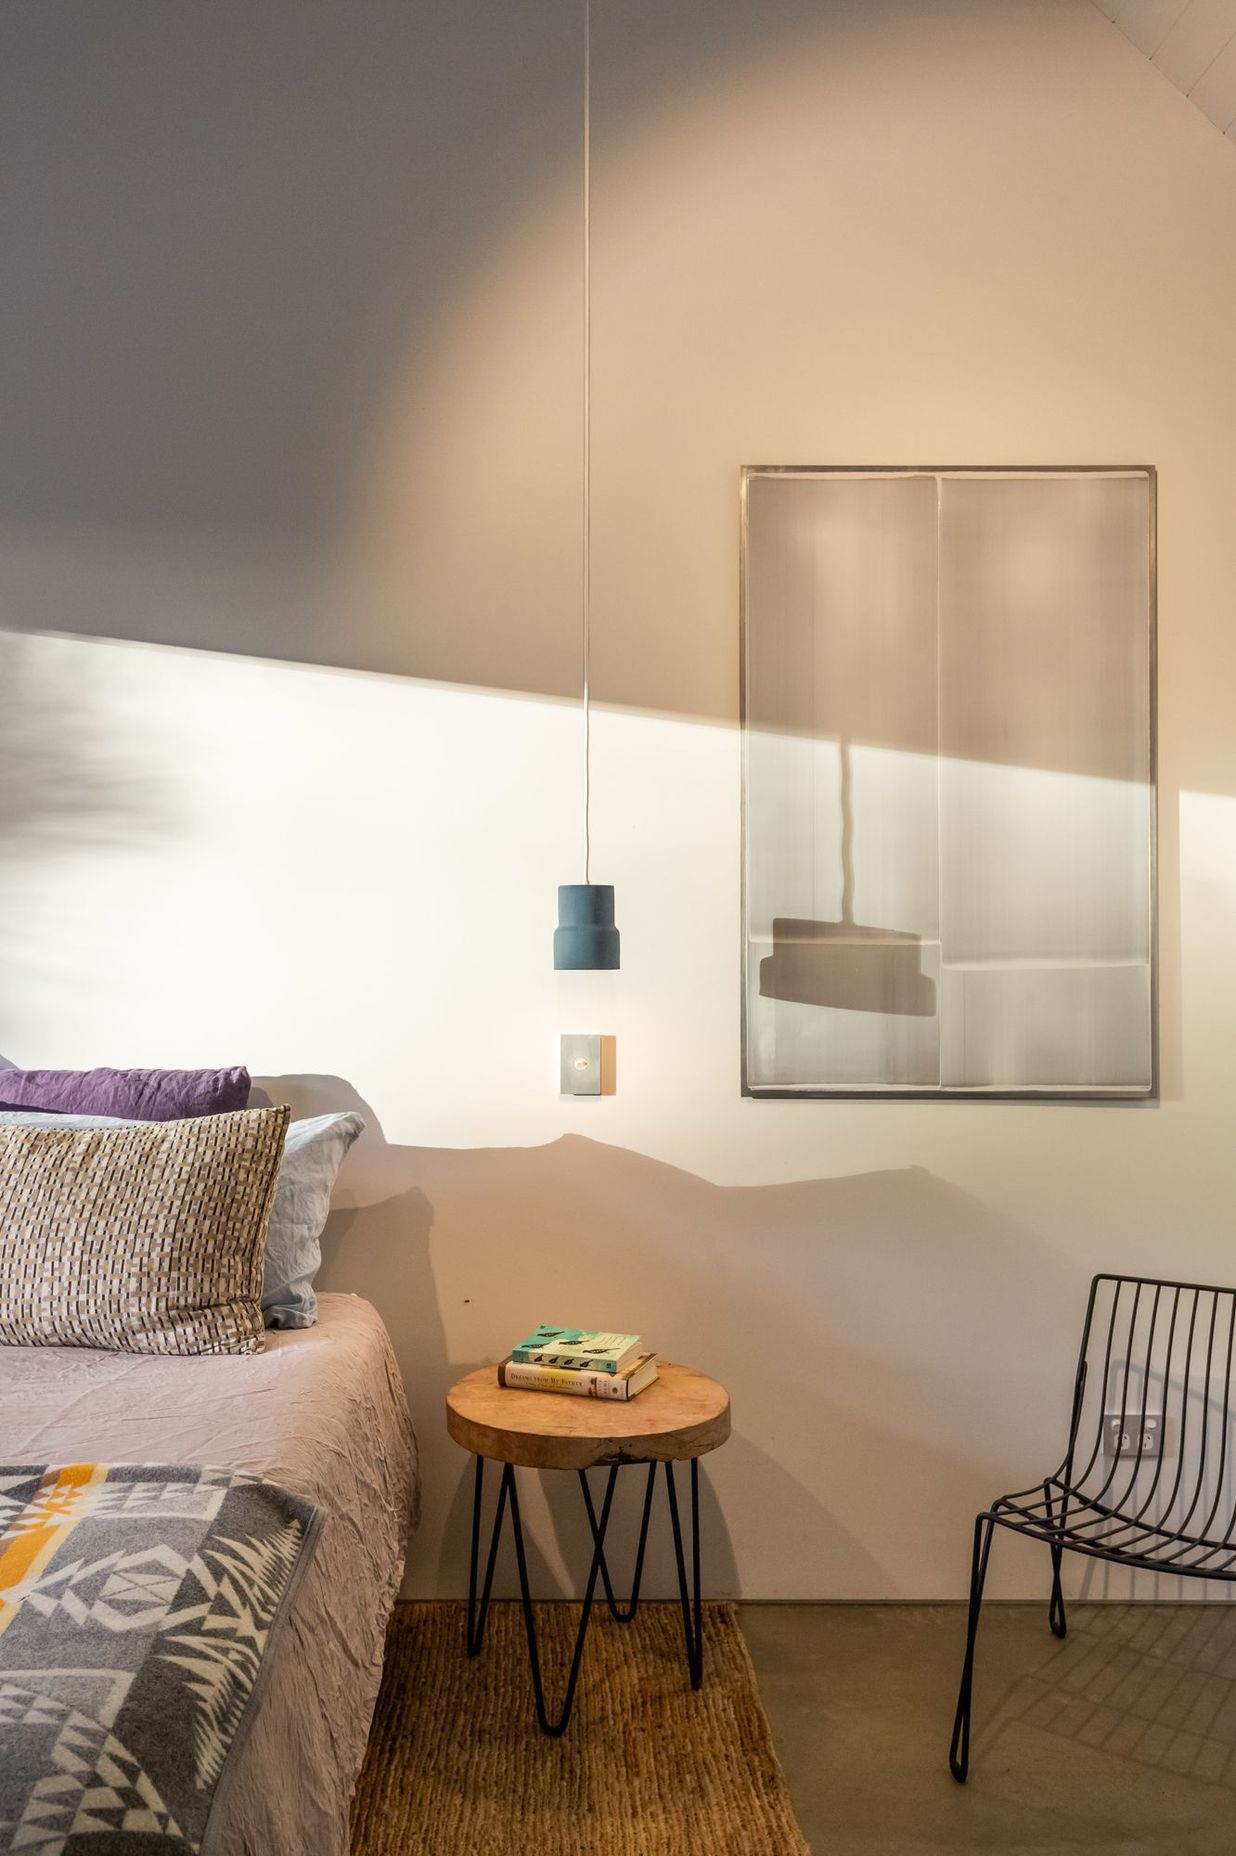 Light colours and simple materials create a calm, relaxed asethetic. 